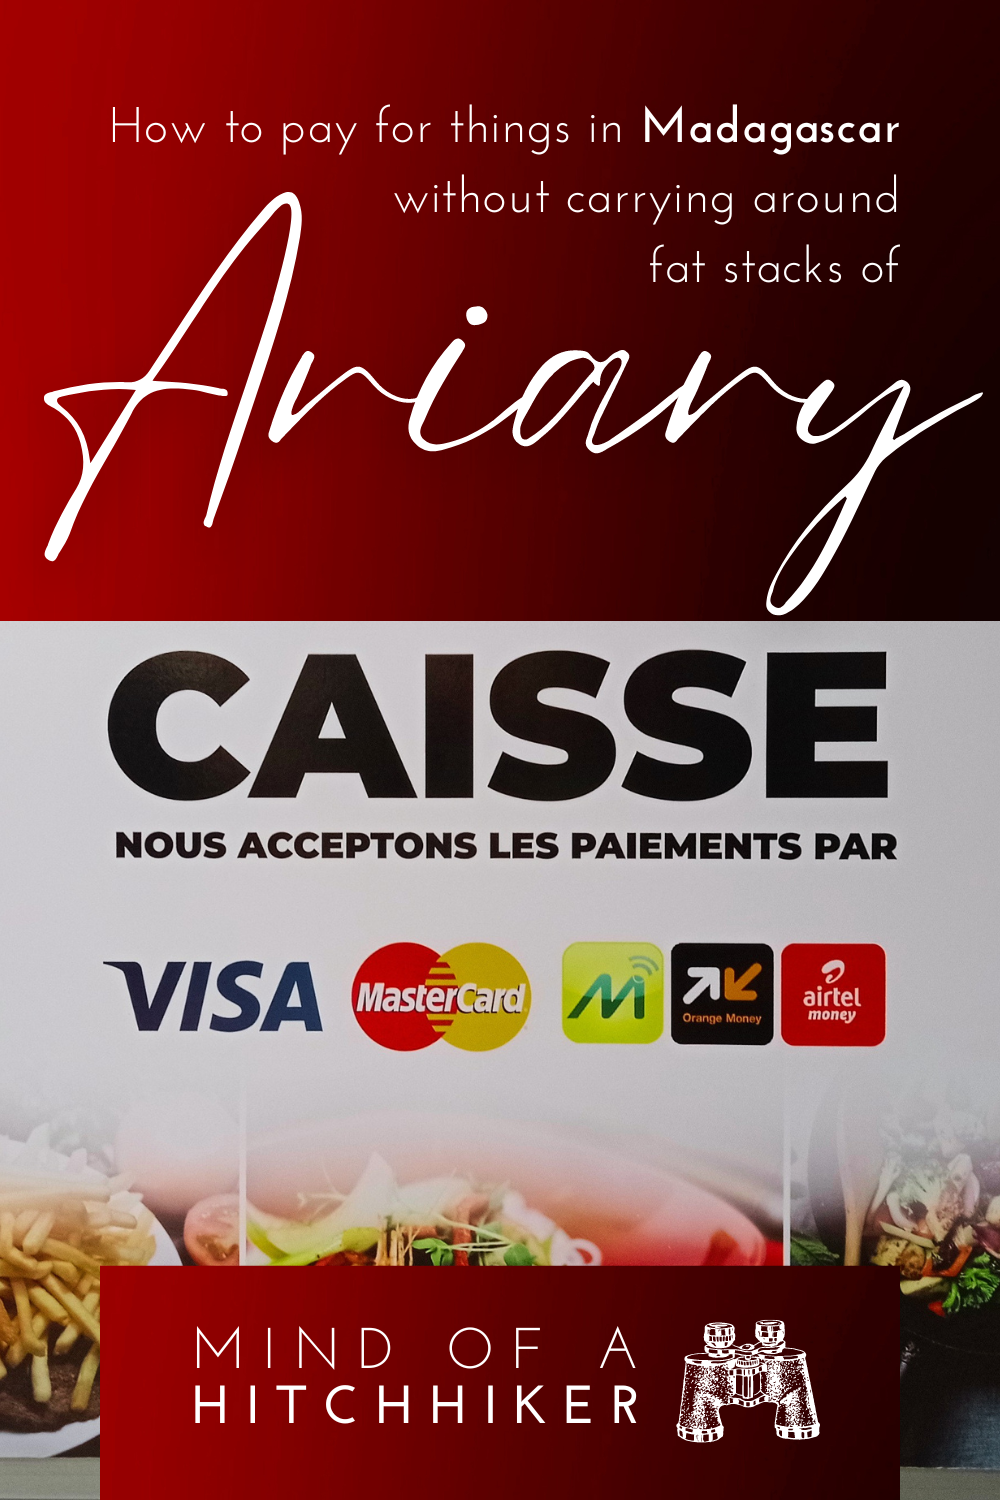 Paying by cash, card, and mobile money services in Madagascar MVola Airtel Orange